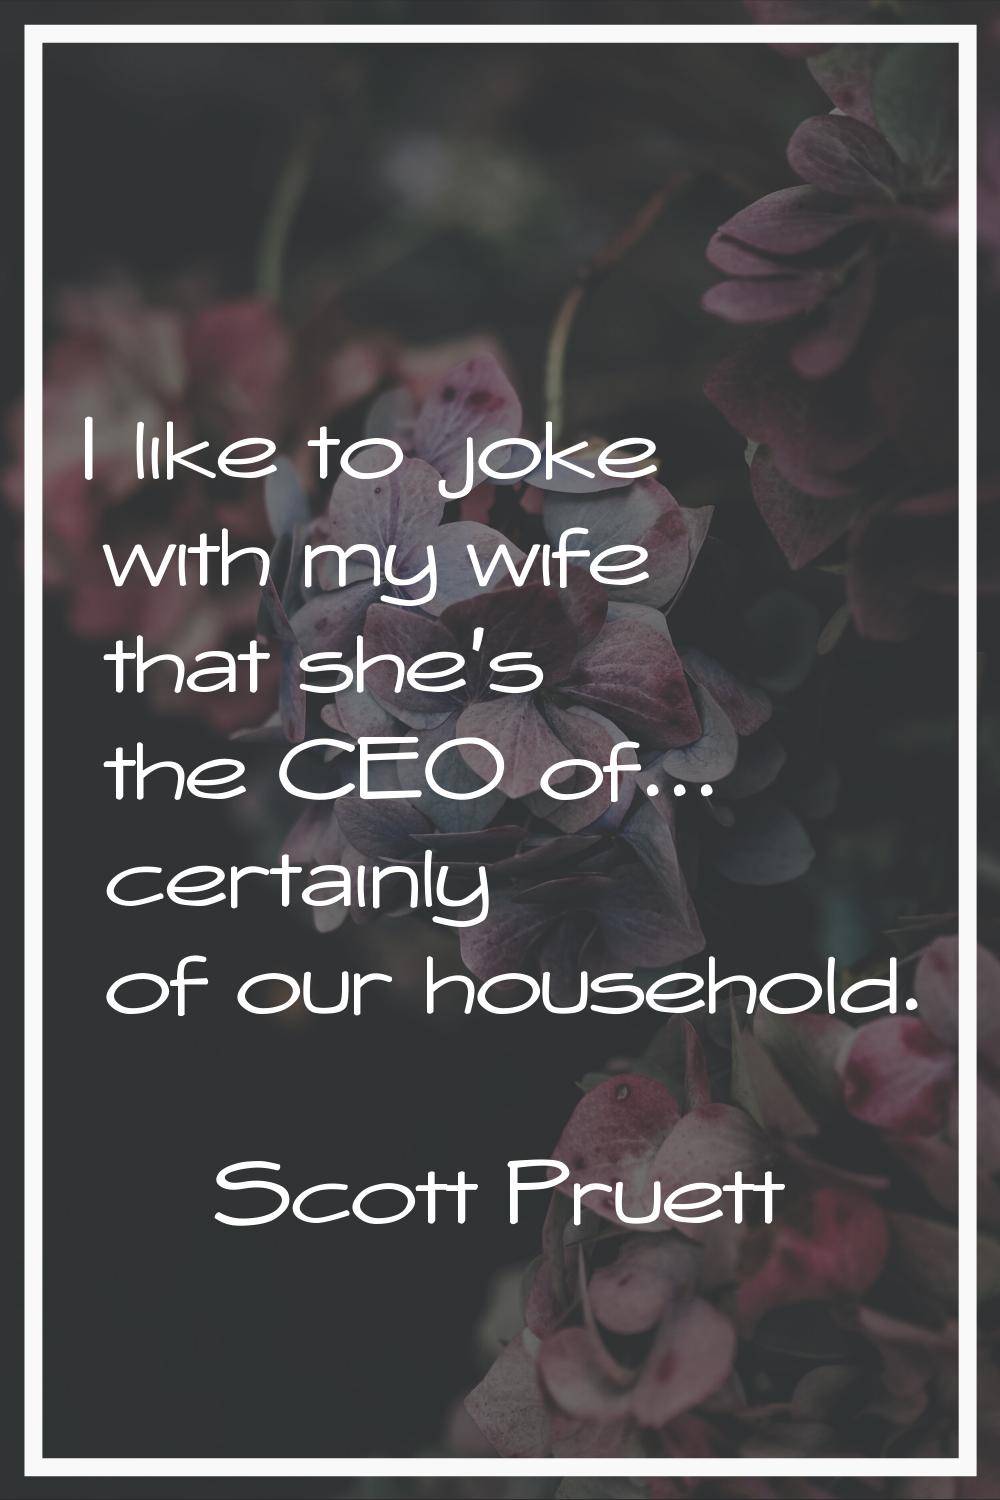 I like to joke with my wife that she's the CEO of... certainly of our household.